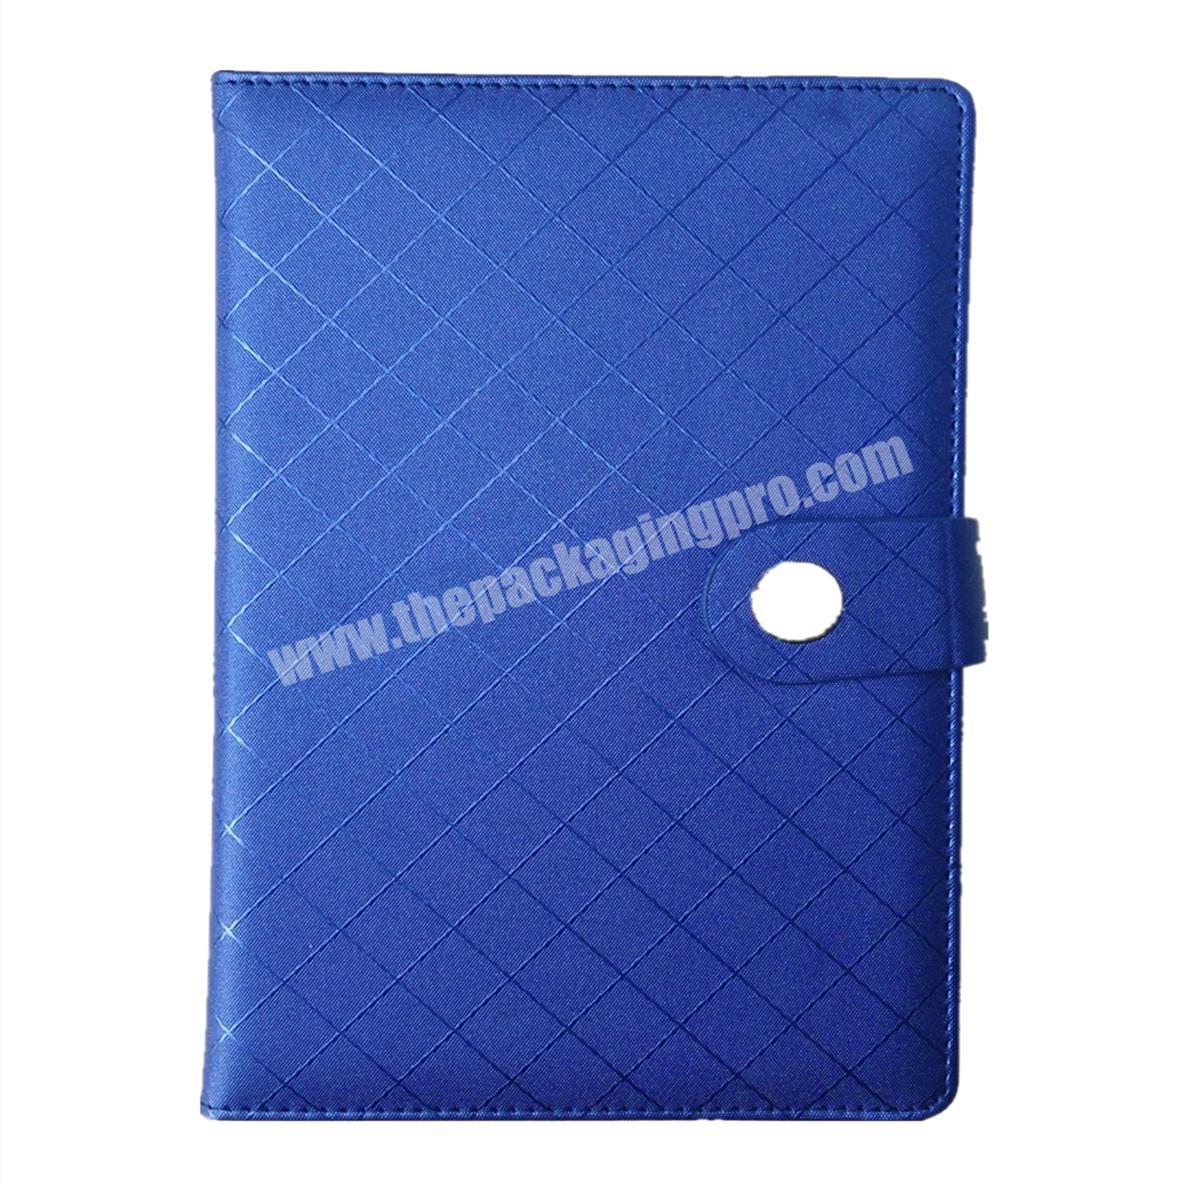 Wholesale Manufacturer Notebook Leather Diary Office Planner Agenda